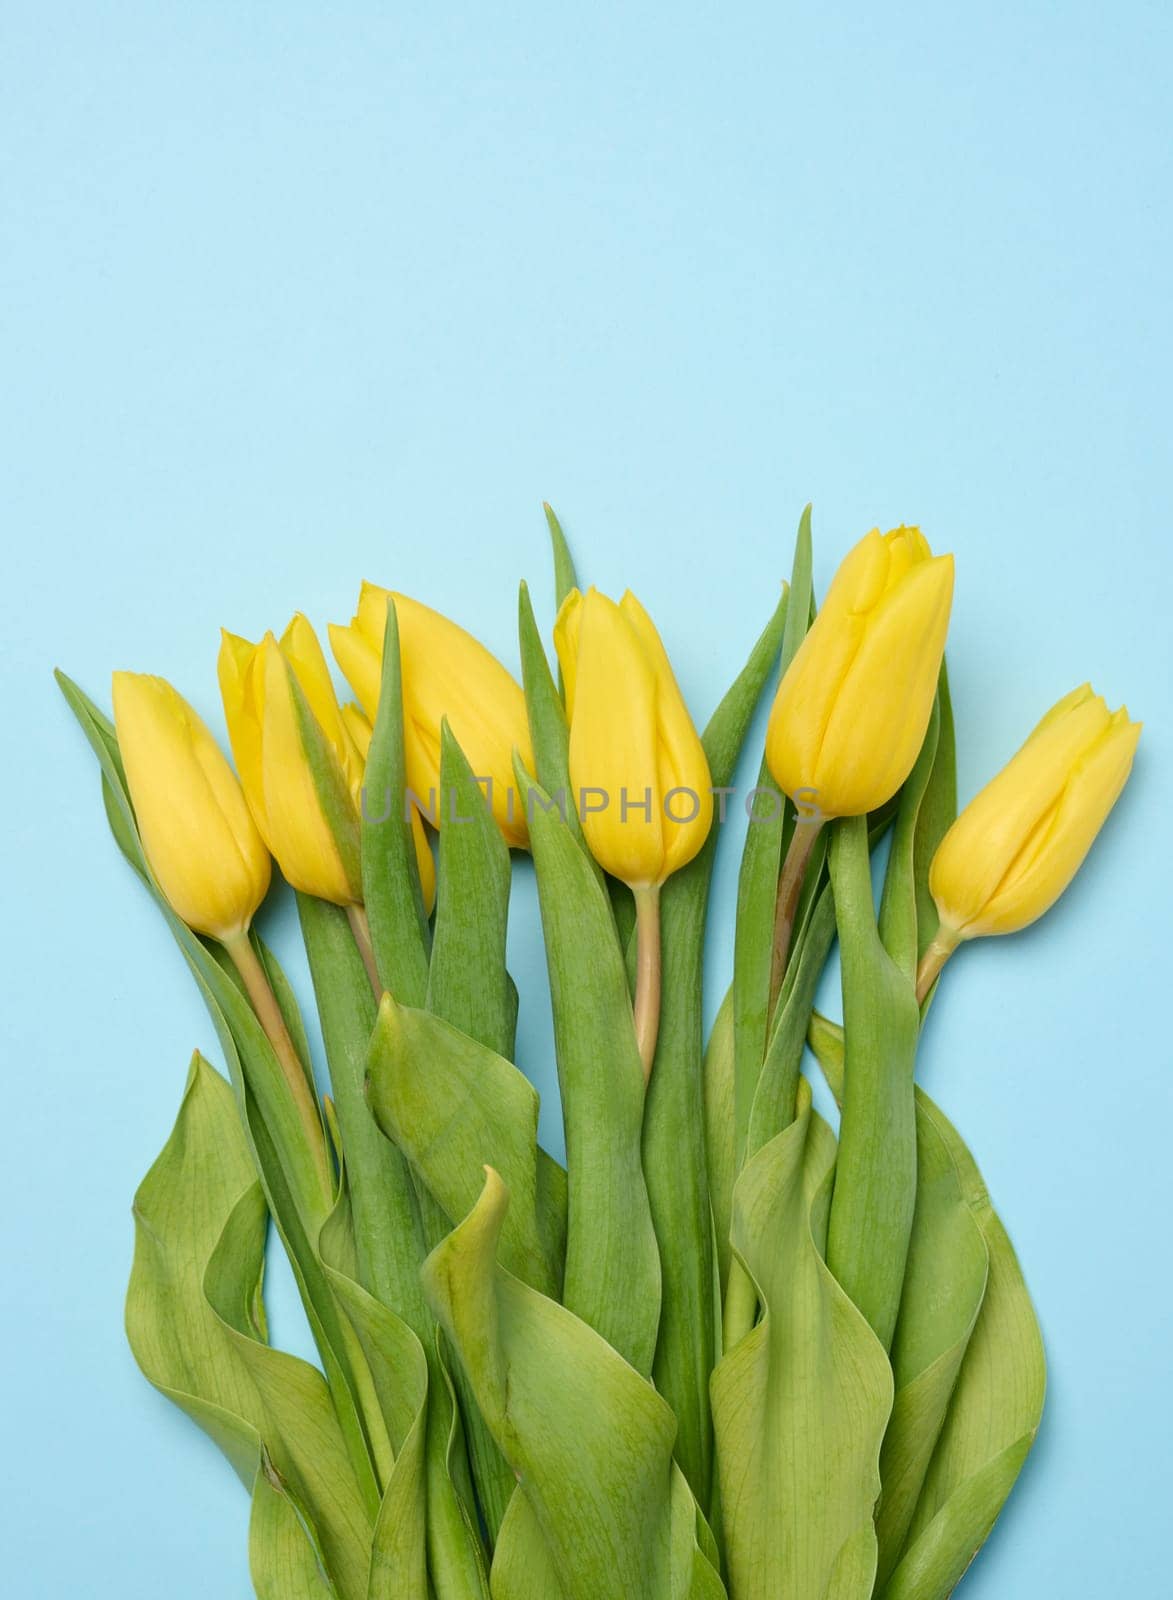 Bouquet of blooming yellow tulips with green leaves on a blue background, top view